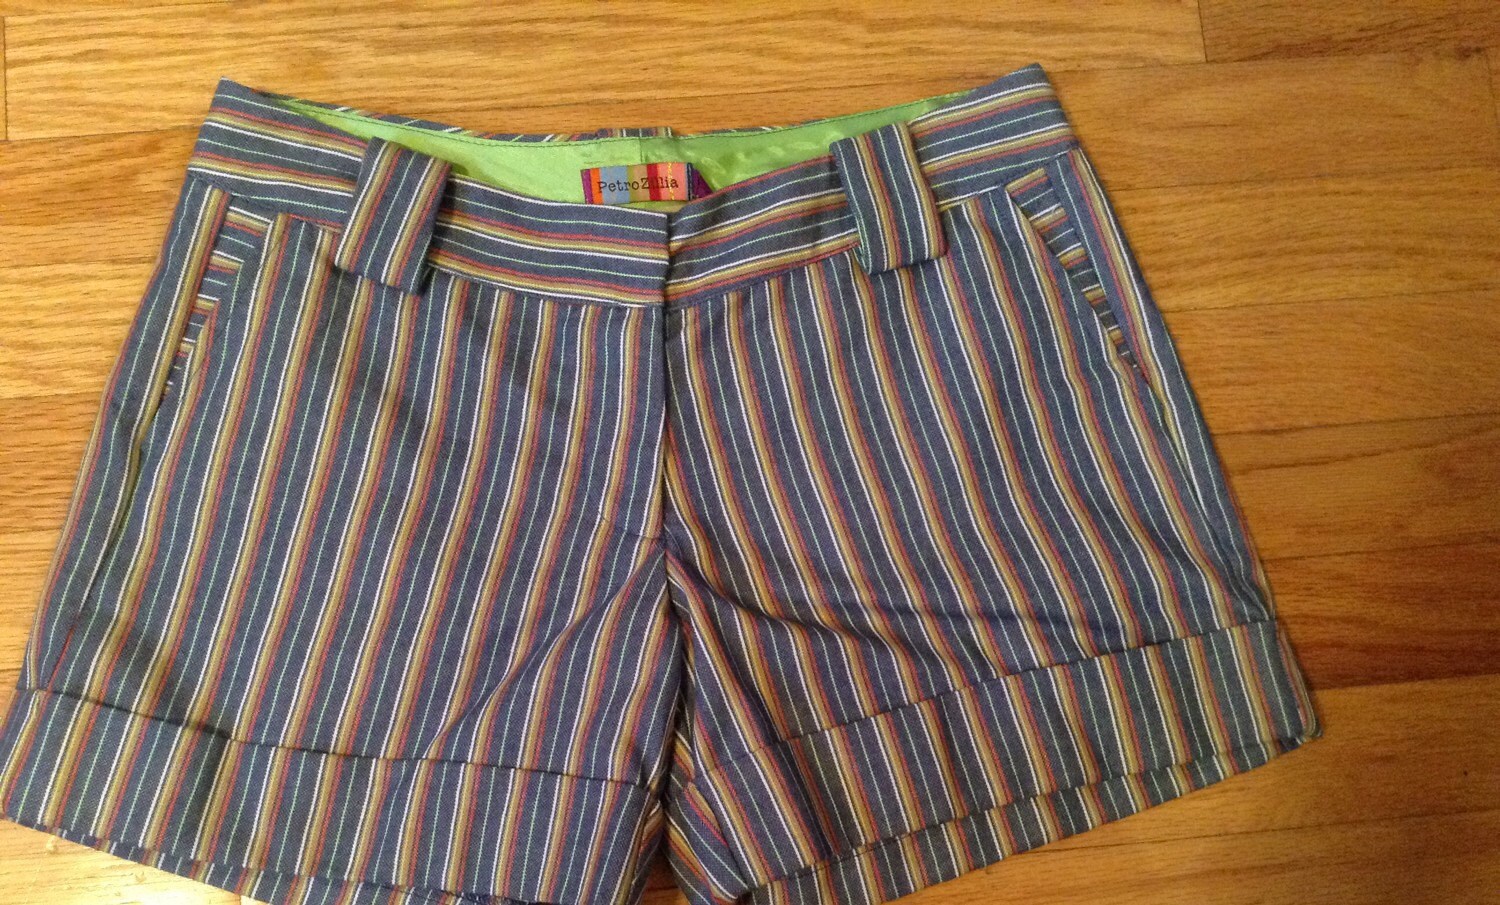 Petro Zillia Trouser Style Pinstripe Shorts With Pockets Size - Etsy